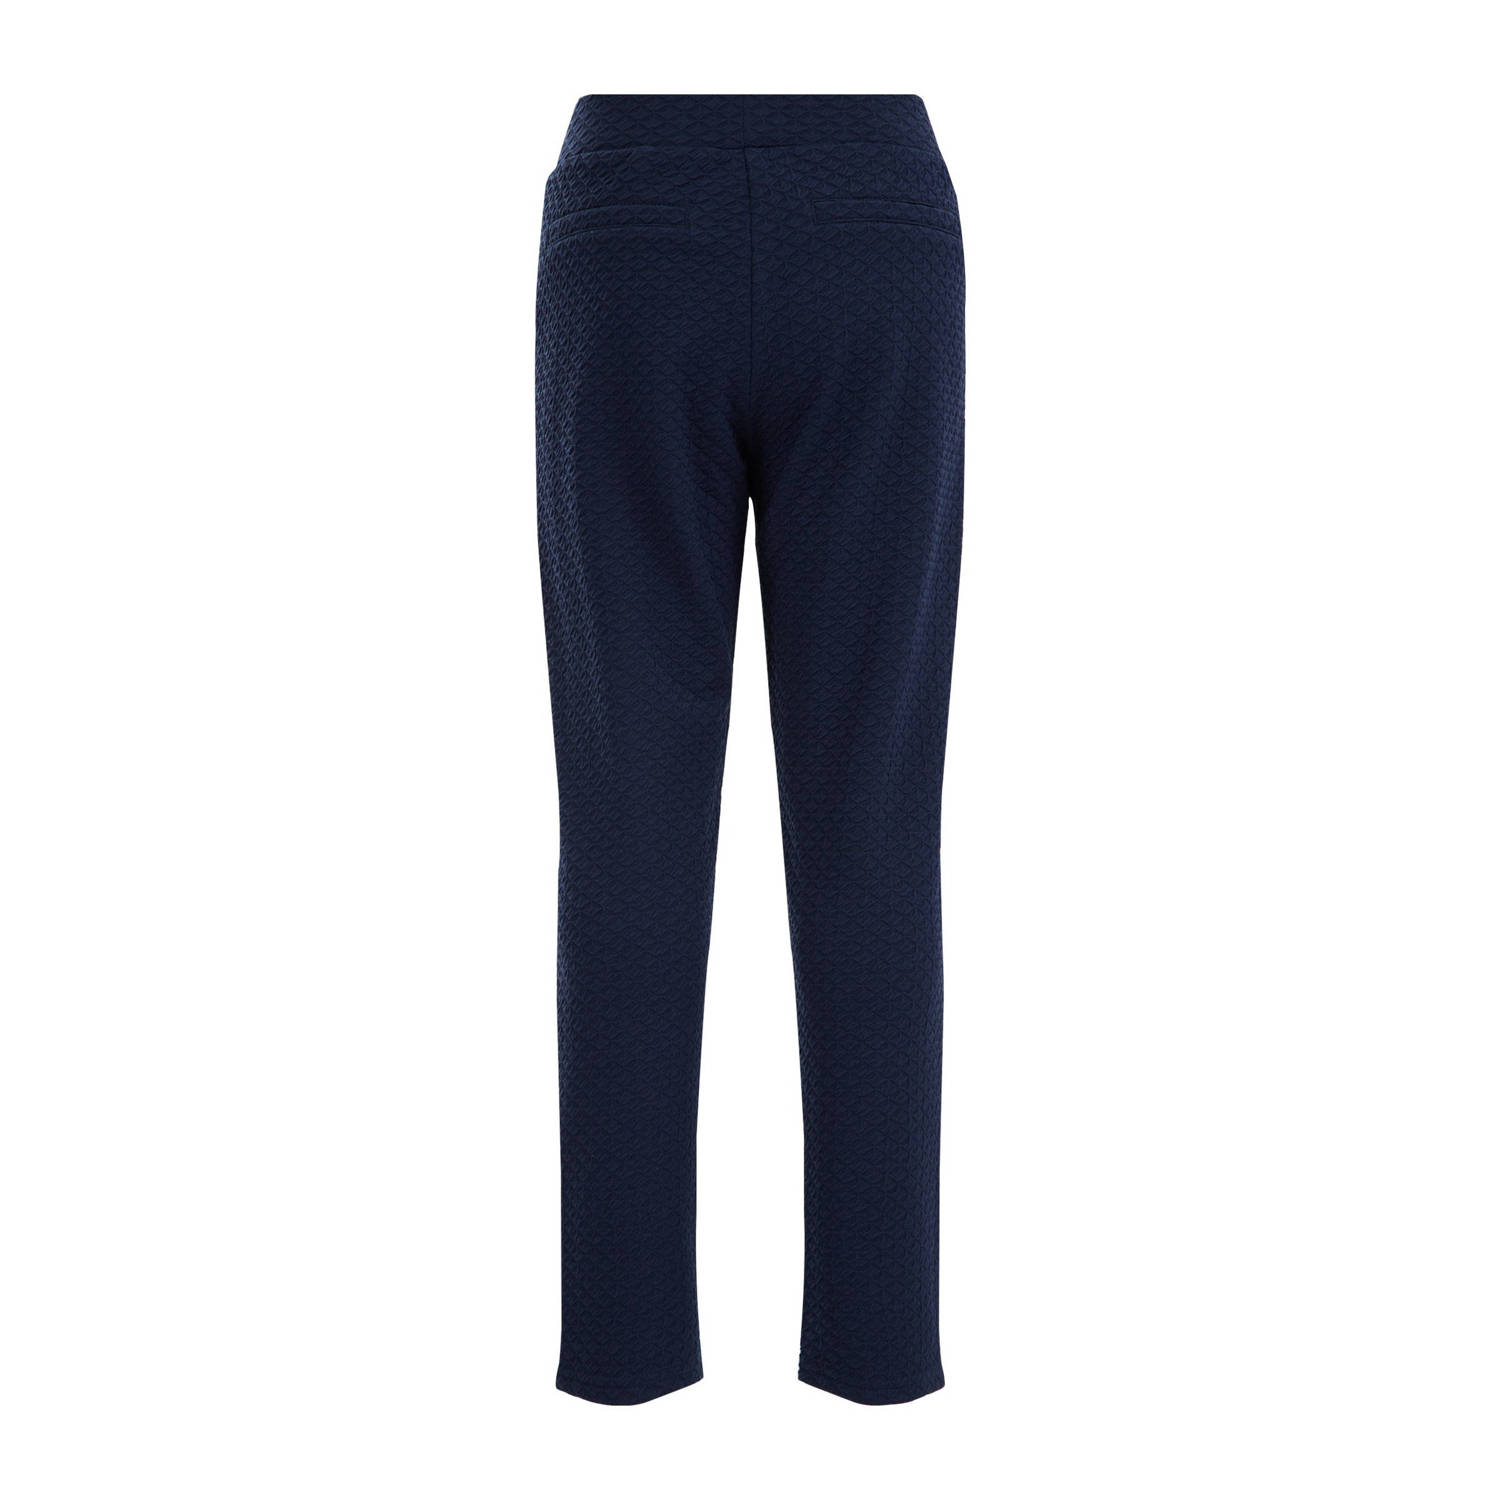 WE Fashion tapered fit broek donkerblauw